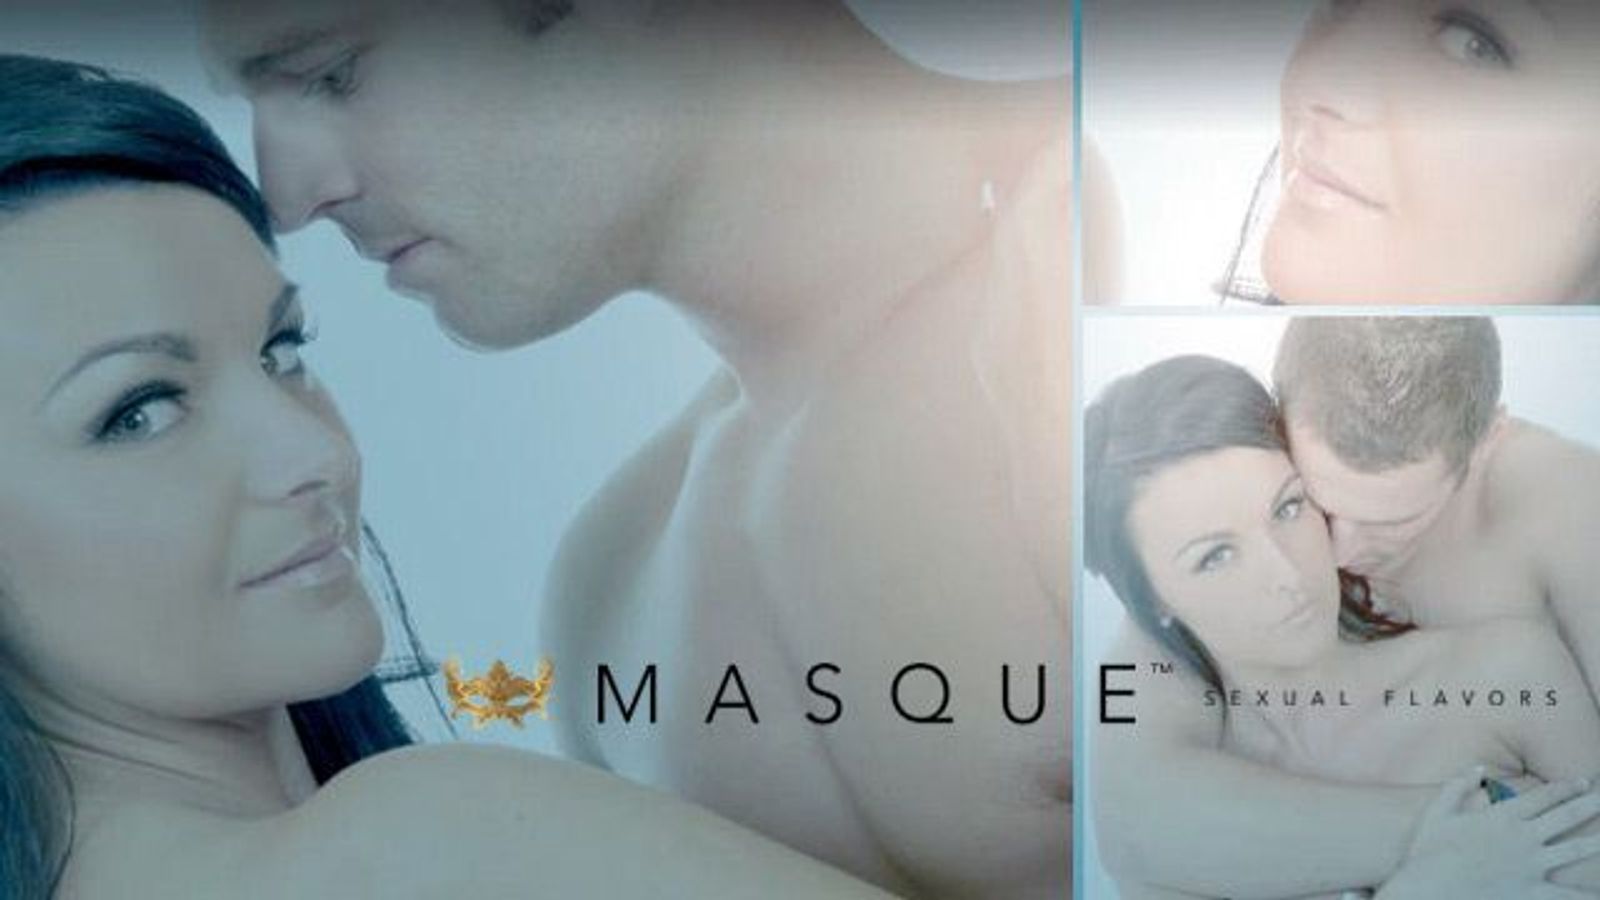 Entrenue Brings Masque Sexual Flavor Strips to Adult Retailers Nationwide